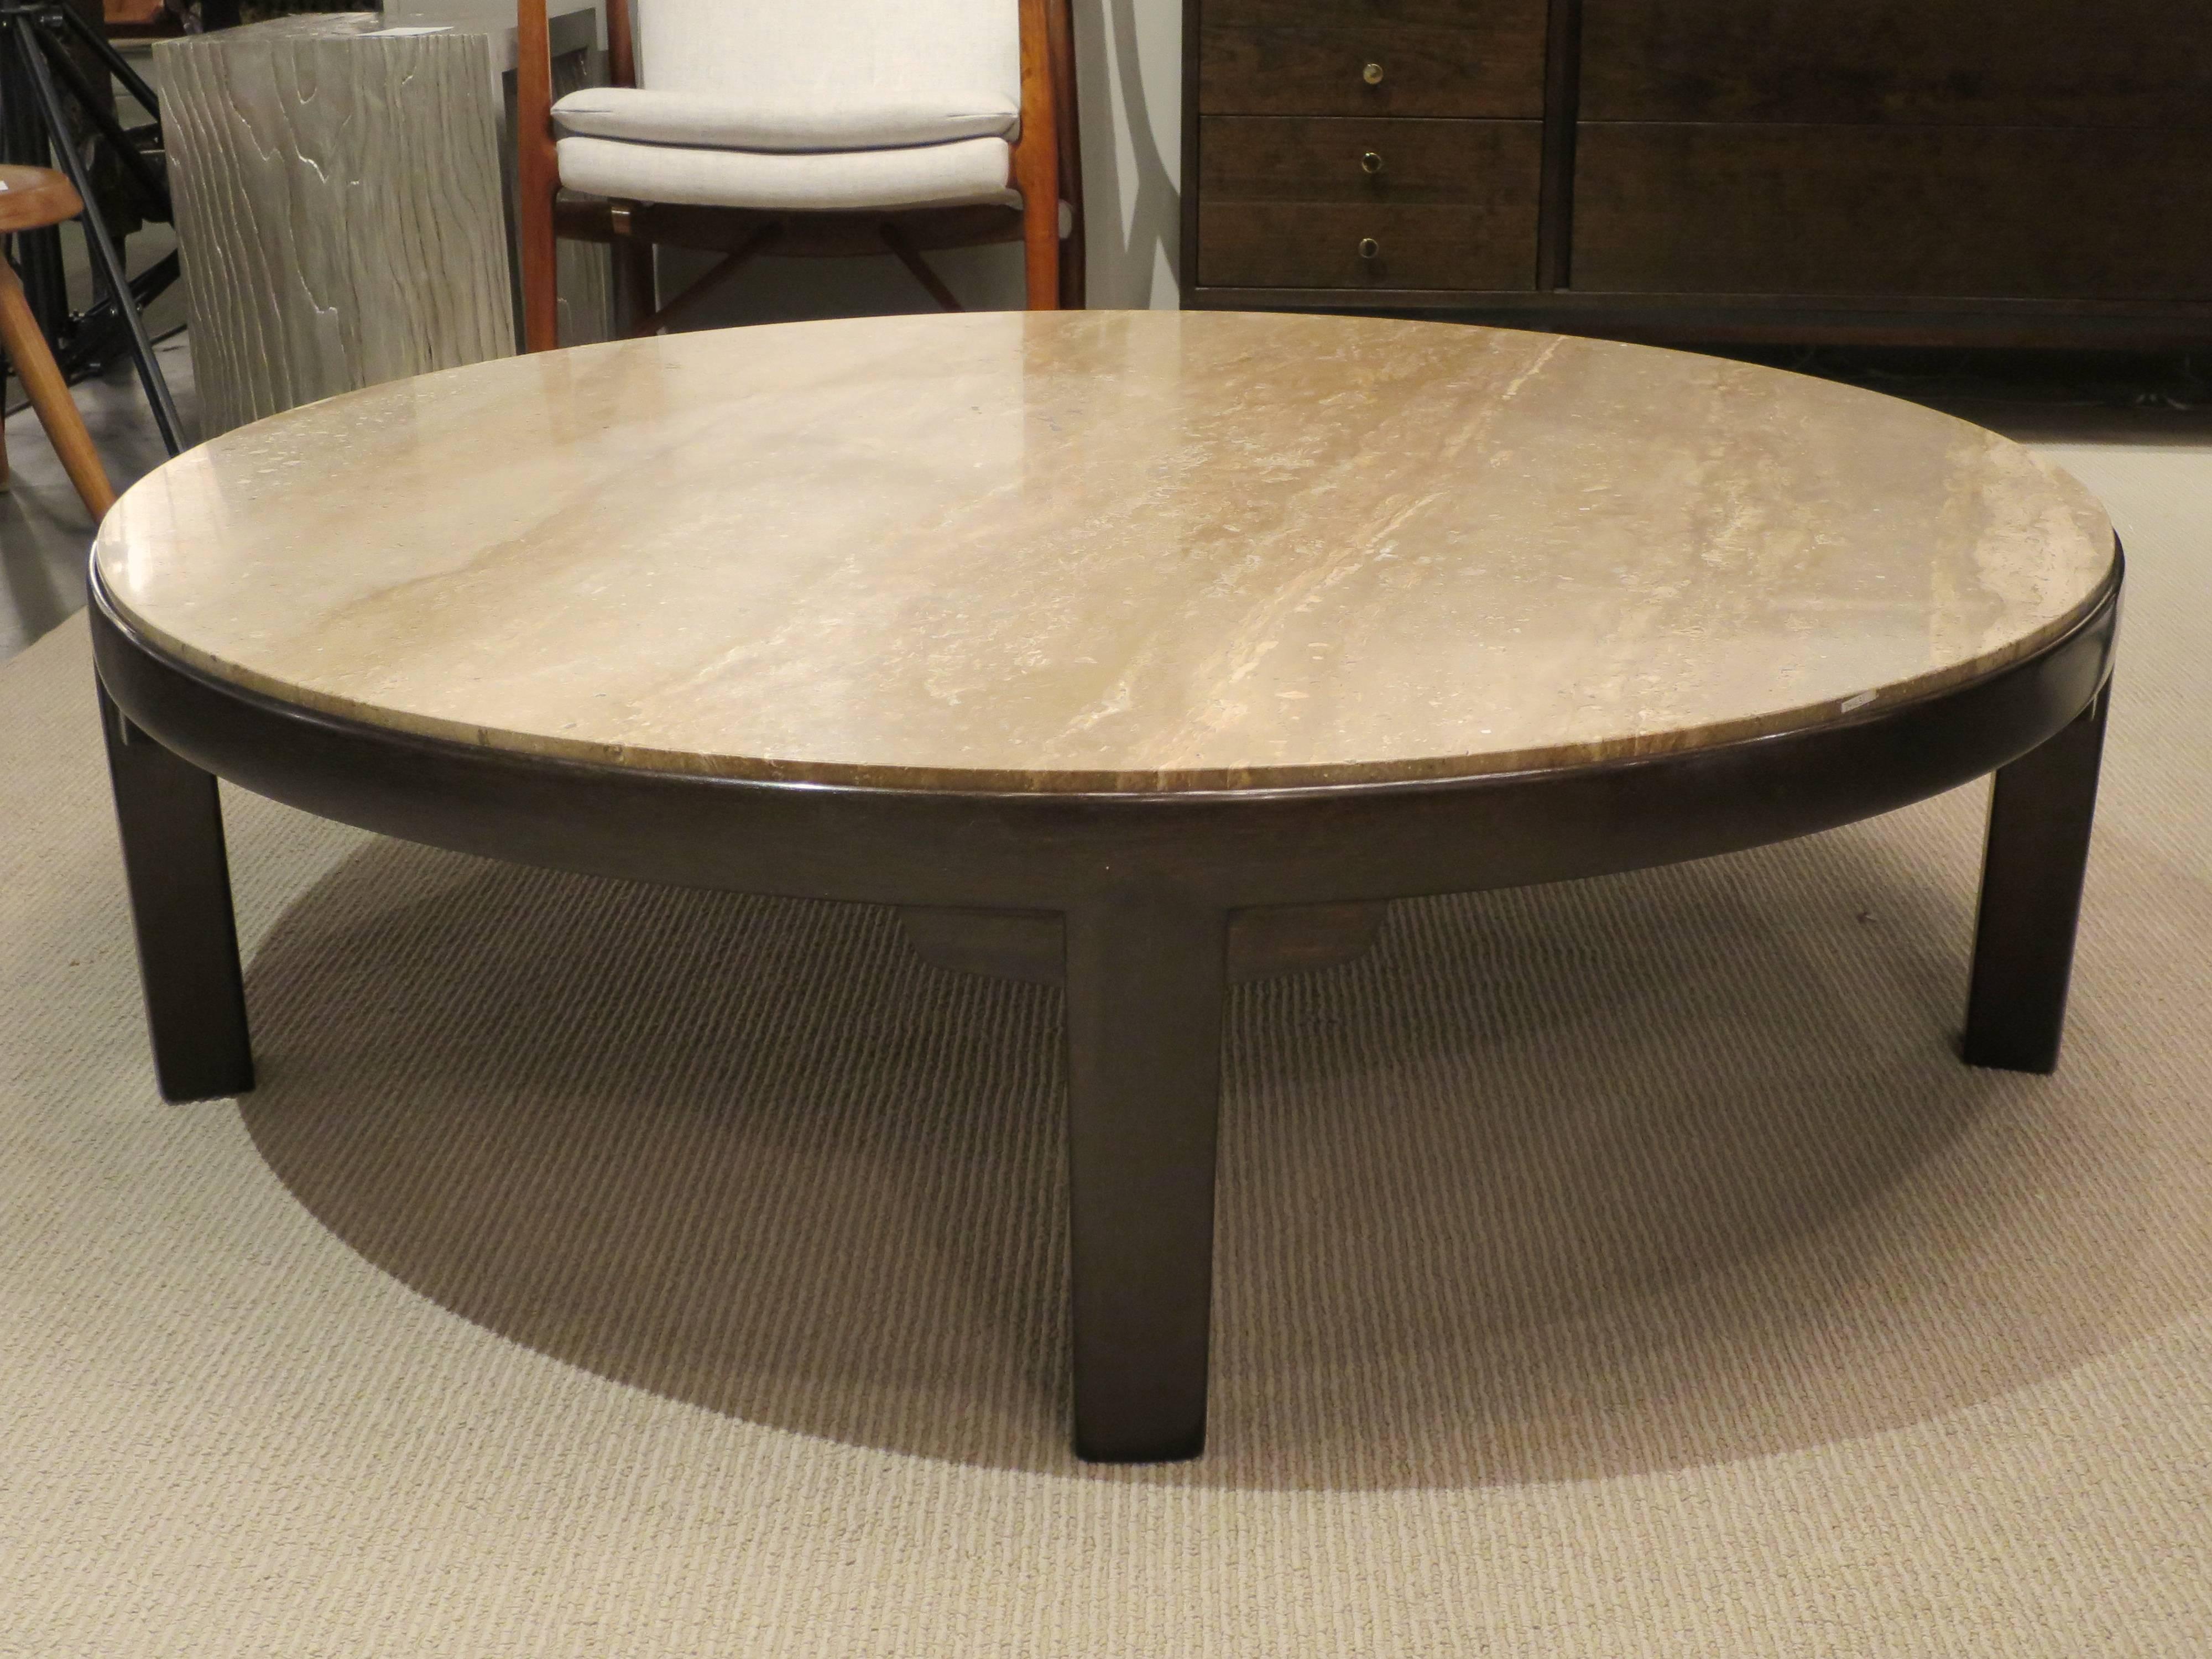 Large-scale round coffee table designed by Edward Wormley for Dunbar, produced in 1950s in Burne, Indiana. Newly refinished mahogany base with original travertine stone top. Metal label underneath. Great modern look and versatility.